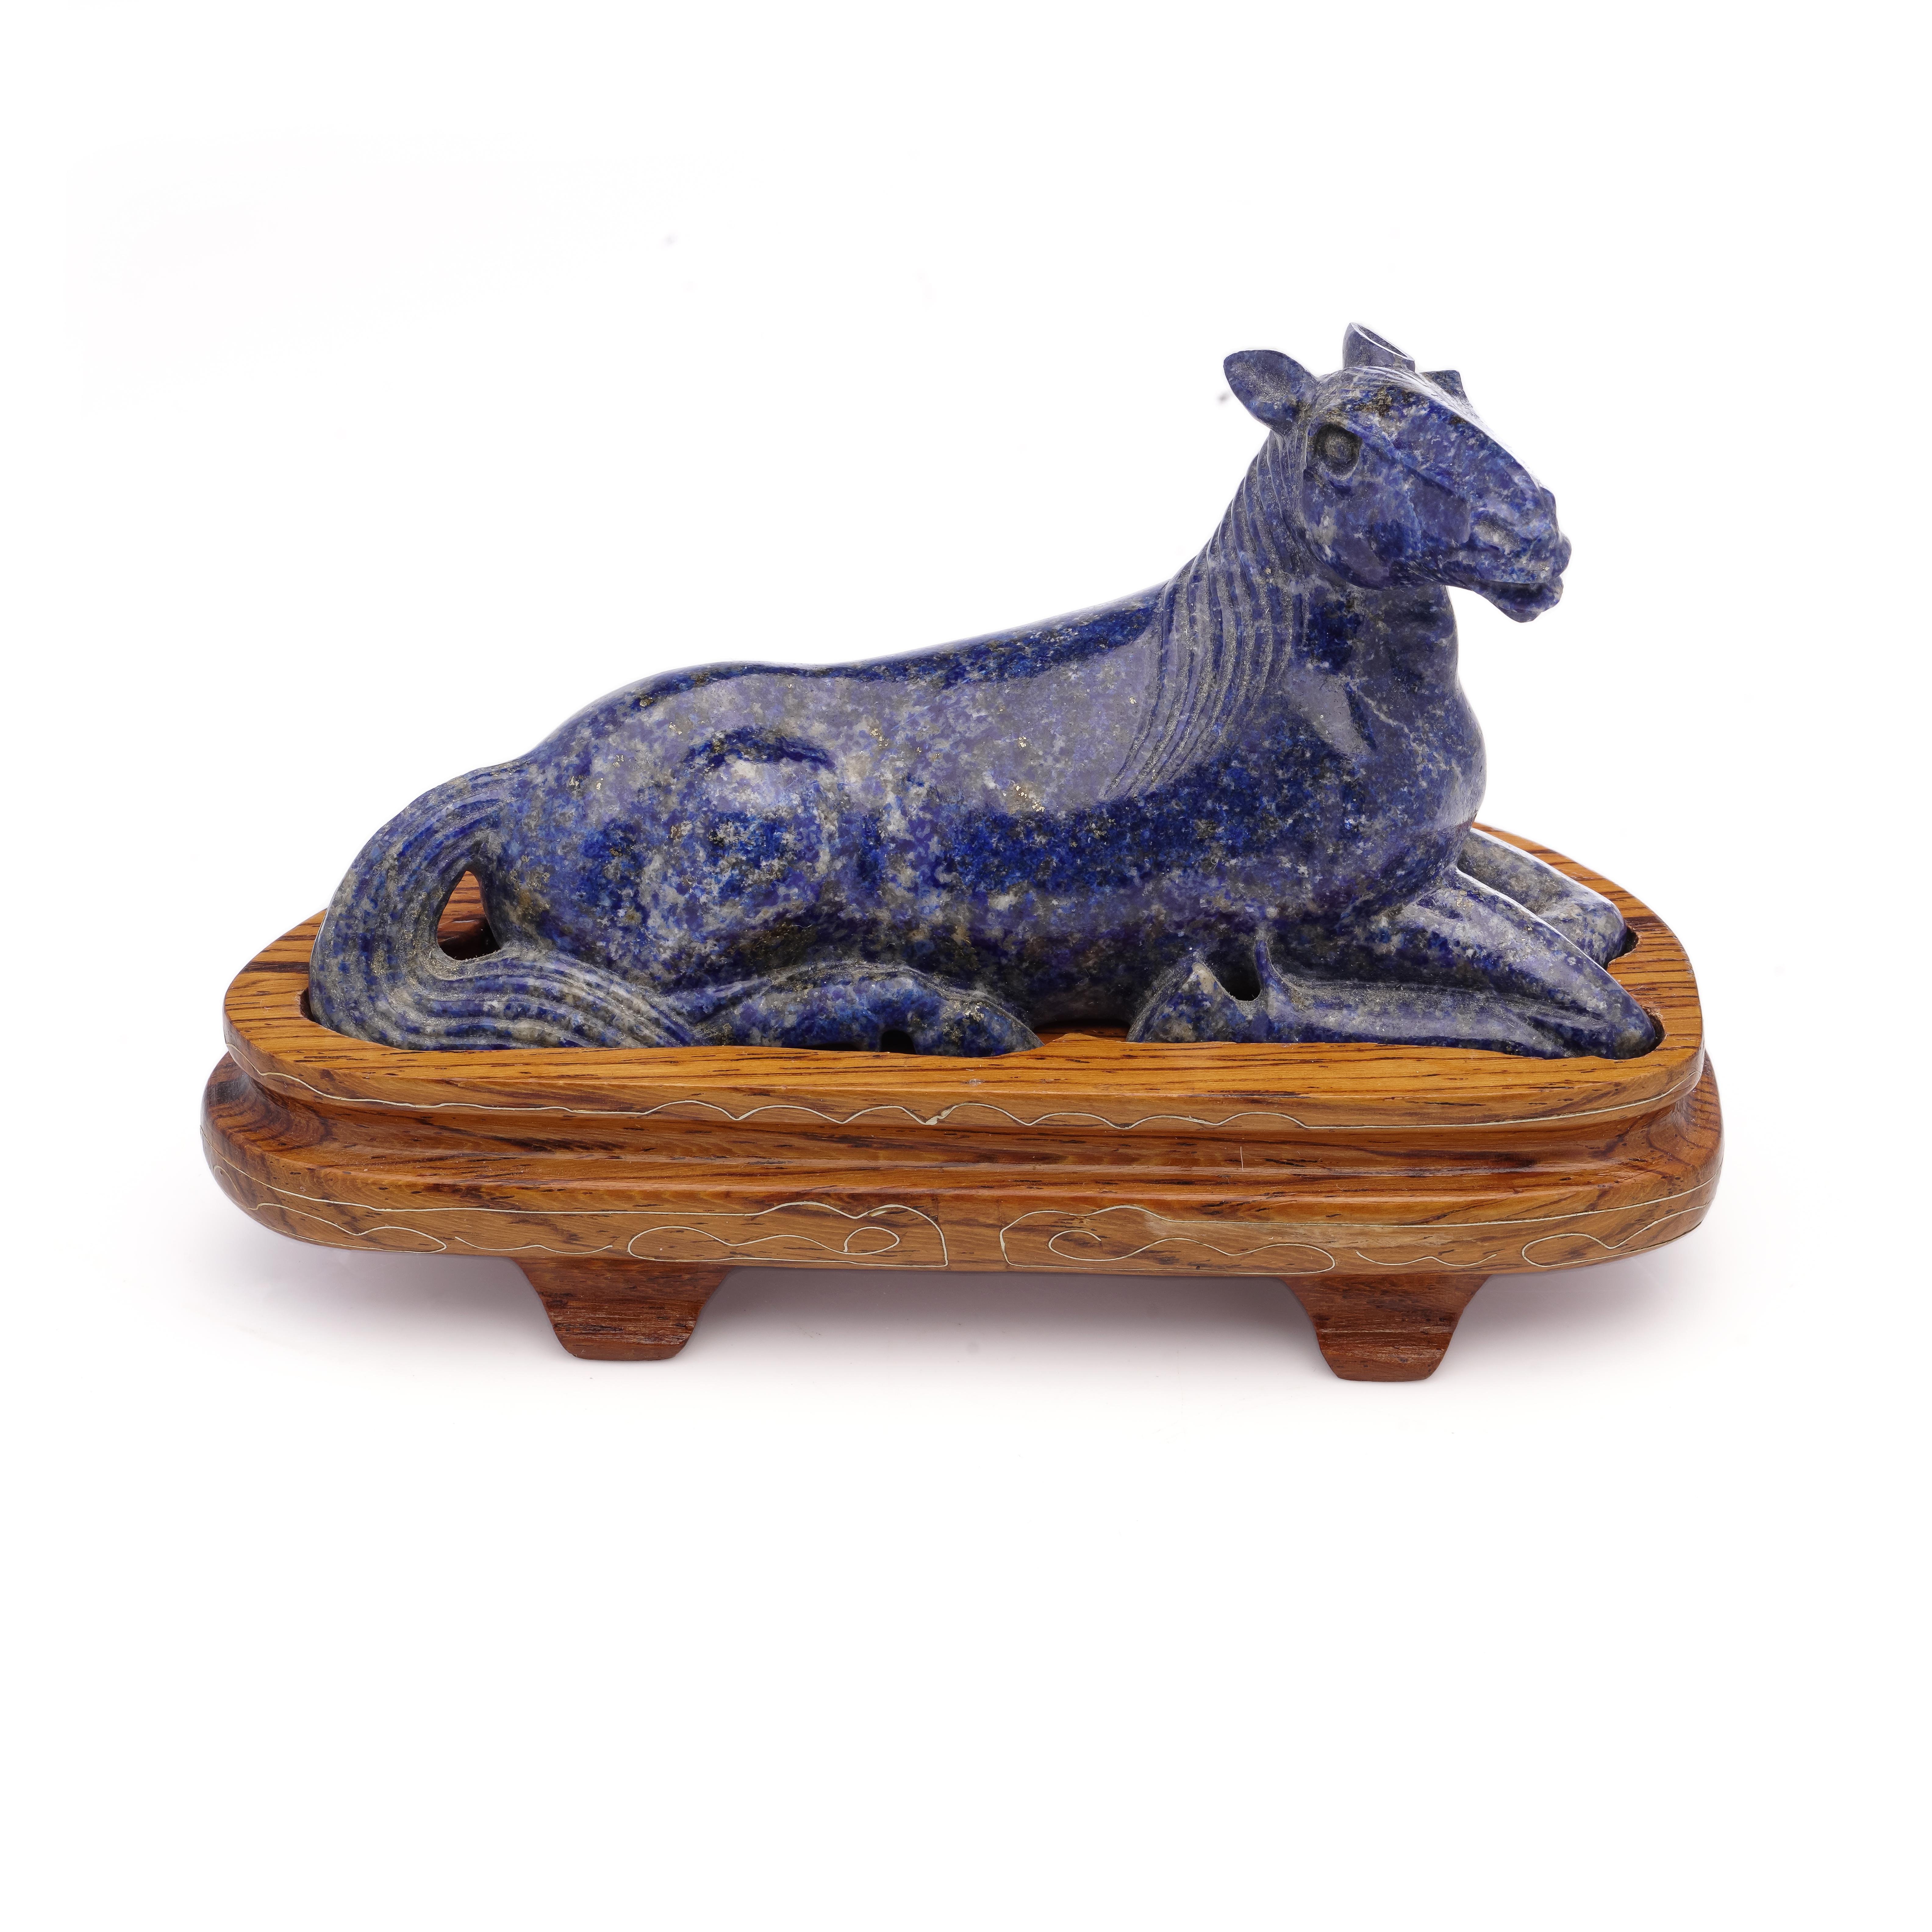 Antique early 20th century Chinese carved lapis lazuli figurine, featuring a recumbent pose with a wood base stand. 

The dimensions: 
Horse size: Approximately 11 cm in length and 3.5 cm in width and 5.5 cm in height. 

Wood base length x